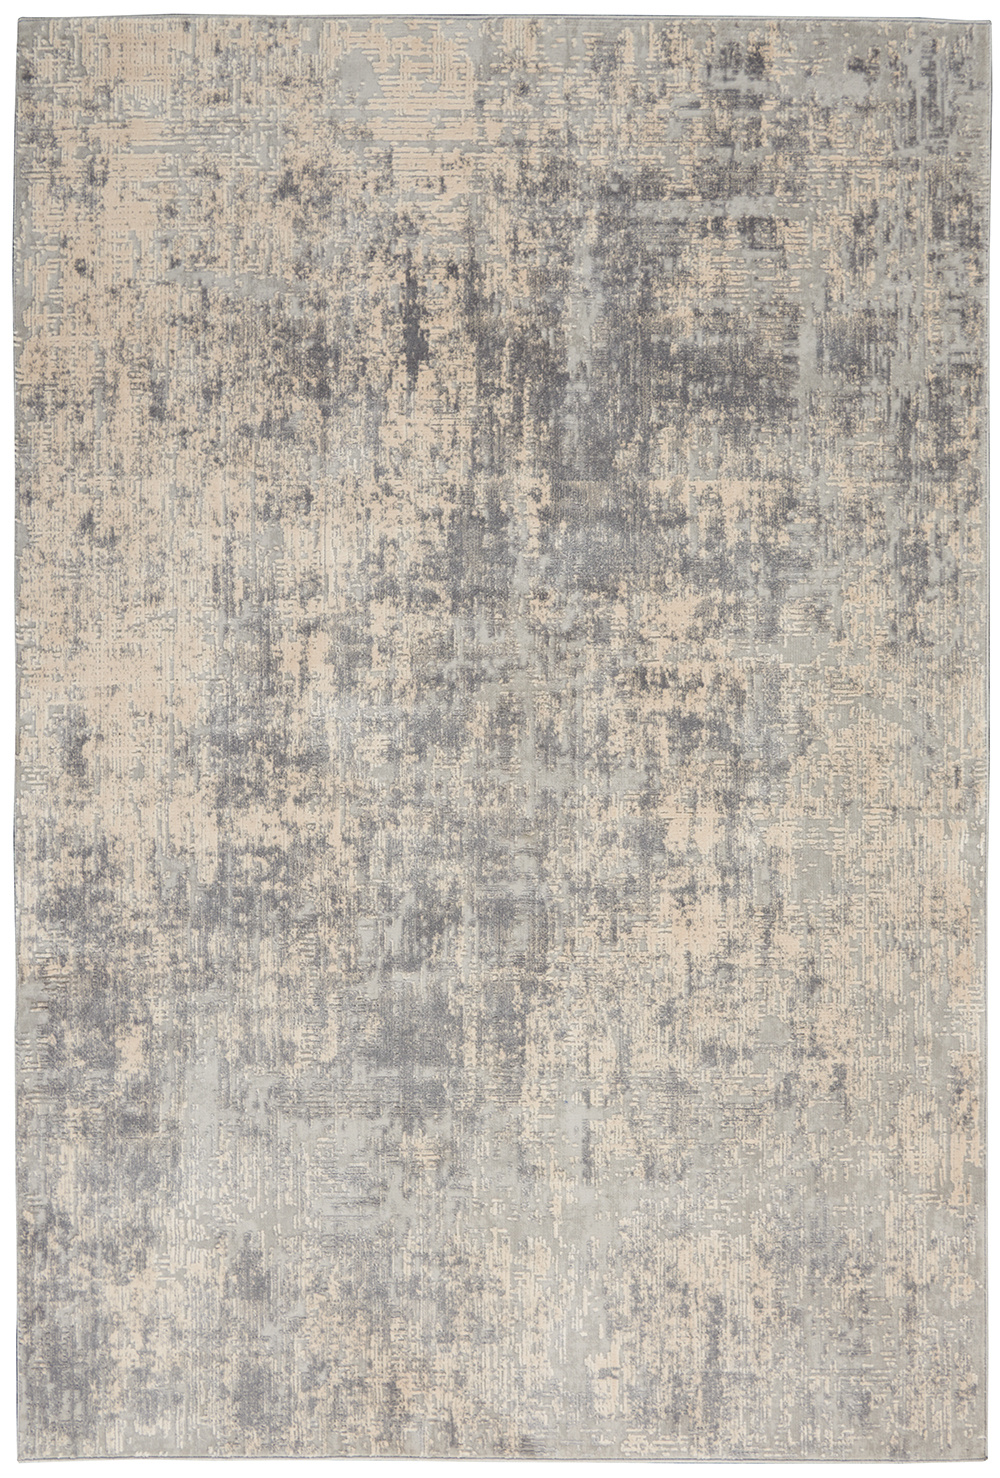 Nourison Rugs - Rustic Textures Rectanglular RUS01 Rug in Ivory / Silver - 2.2m x 1.6m